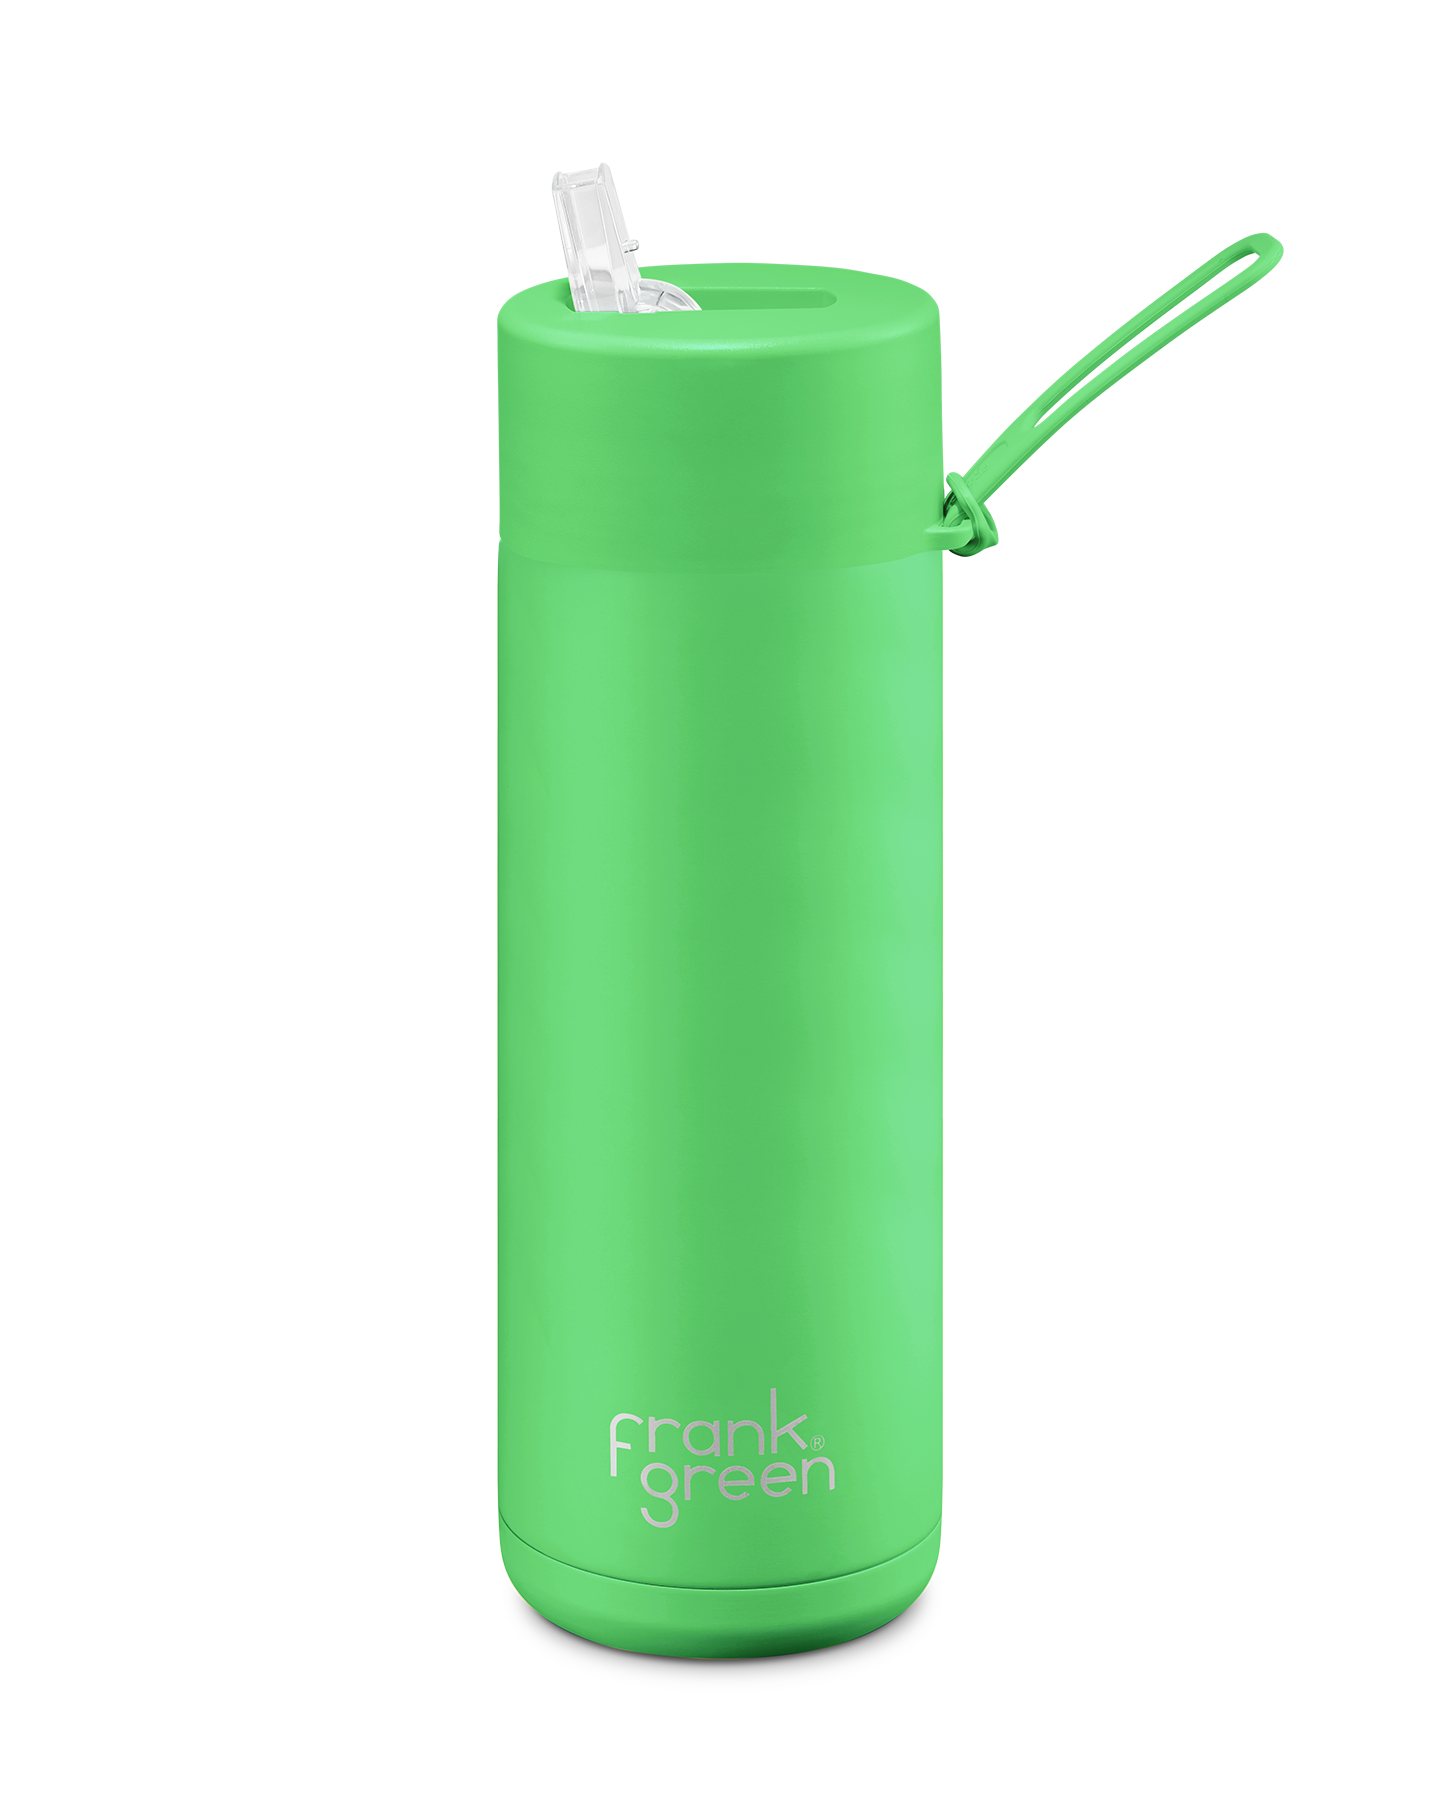 FRANK GREEN CERAMIC REUSABLE DRINK BOTTLE 20oz WITH STRAW LID - NEON GREEN